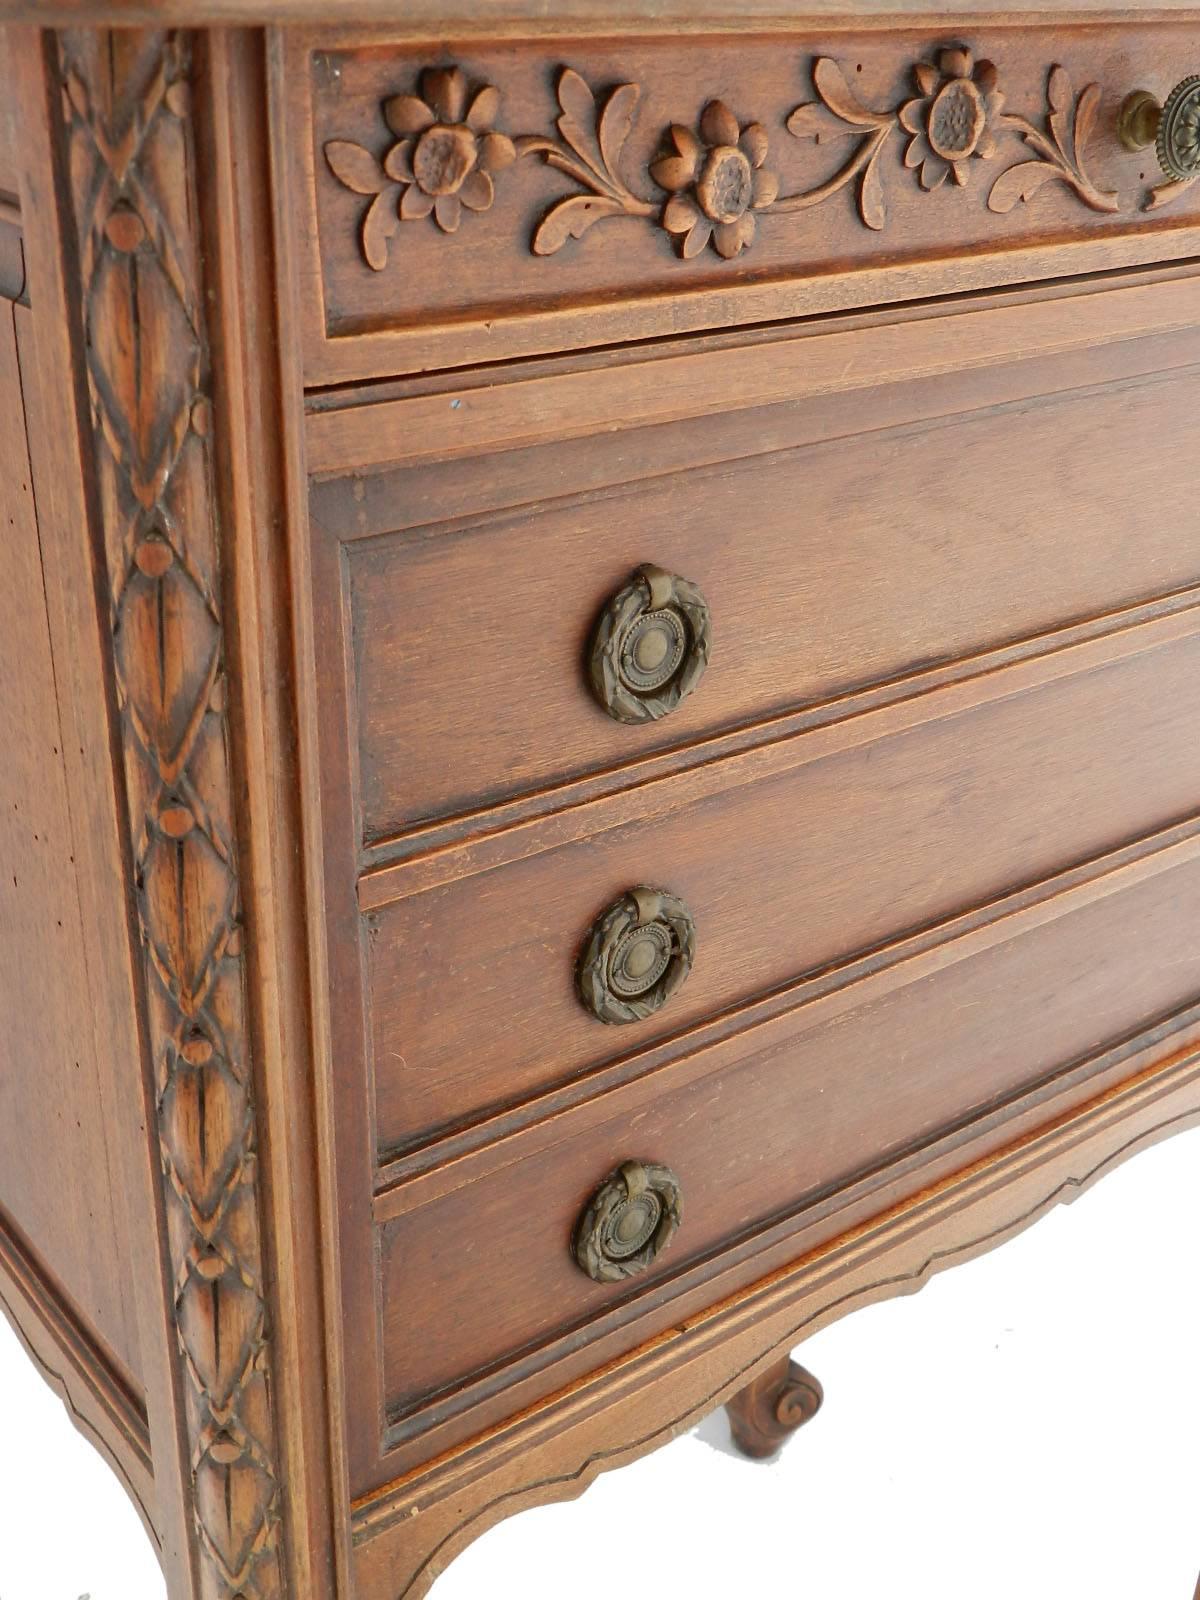 Side cabinet French 19th century Louis XVI revival bedside table nightstand cupboard
A good unusual French marble-top side cabinet in very good antique condition
Useful cupboard that will work in any room of the home with charming faux front